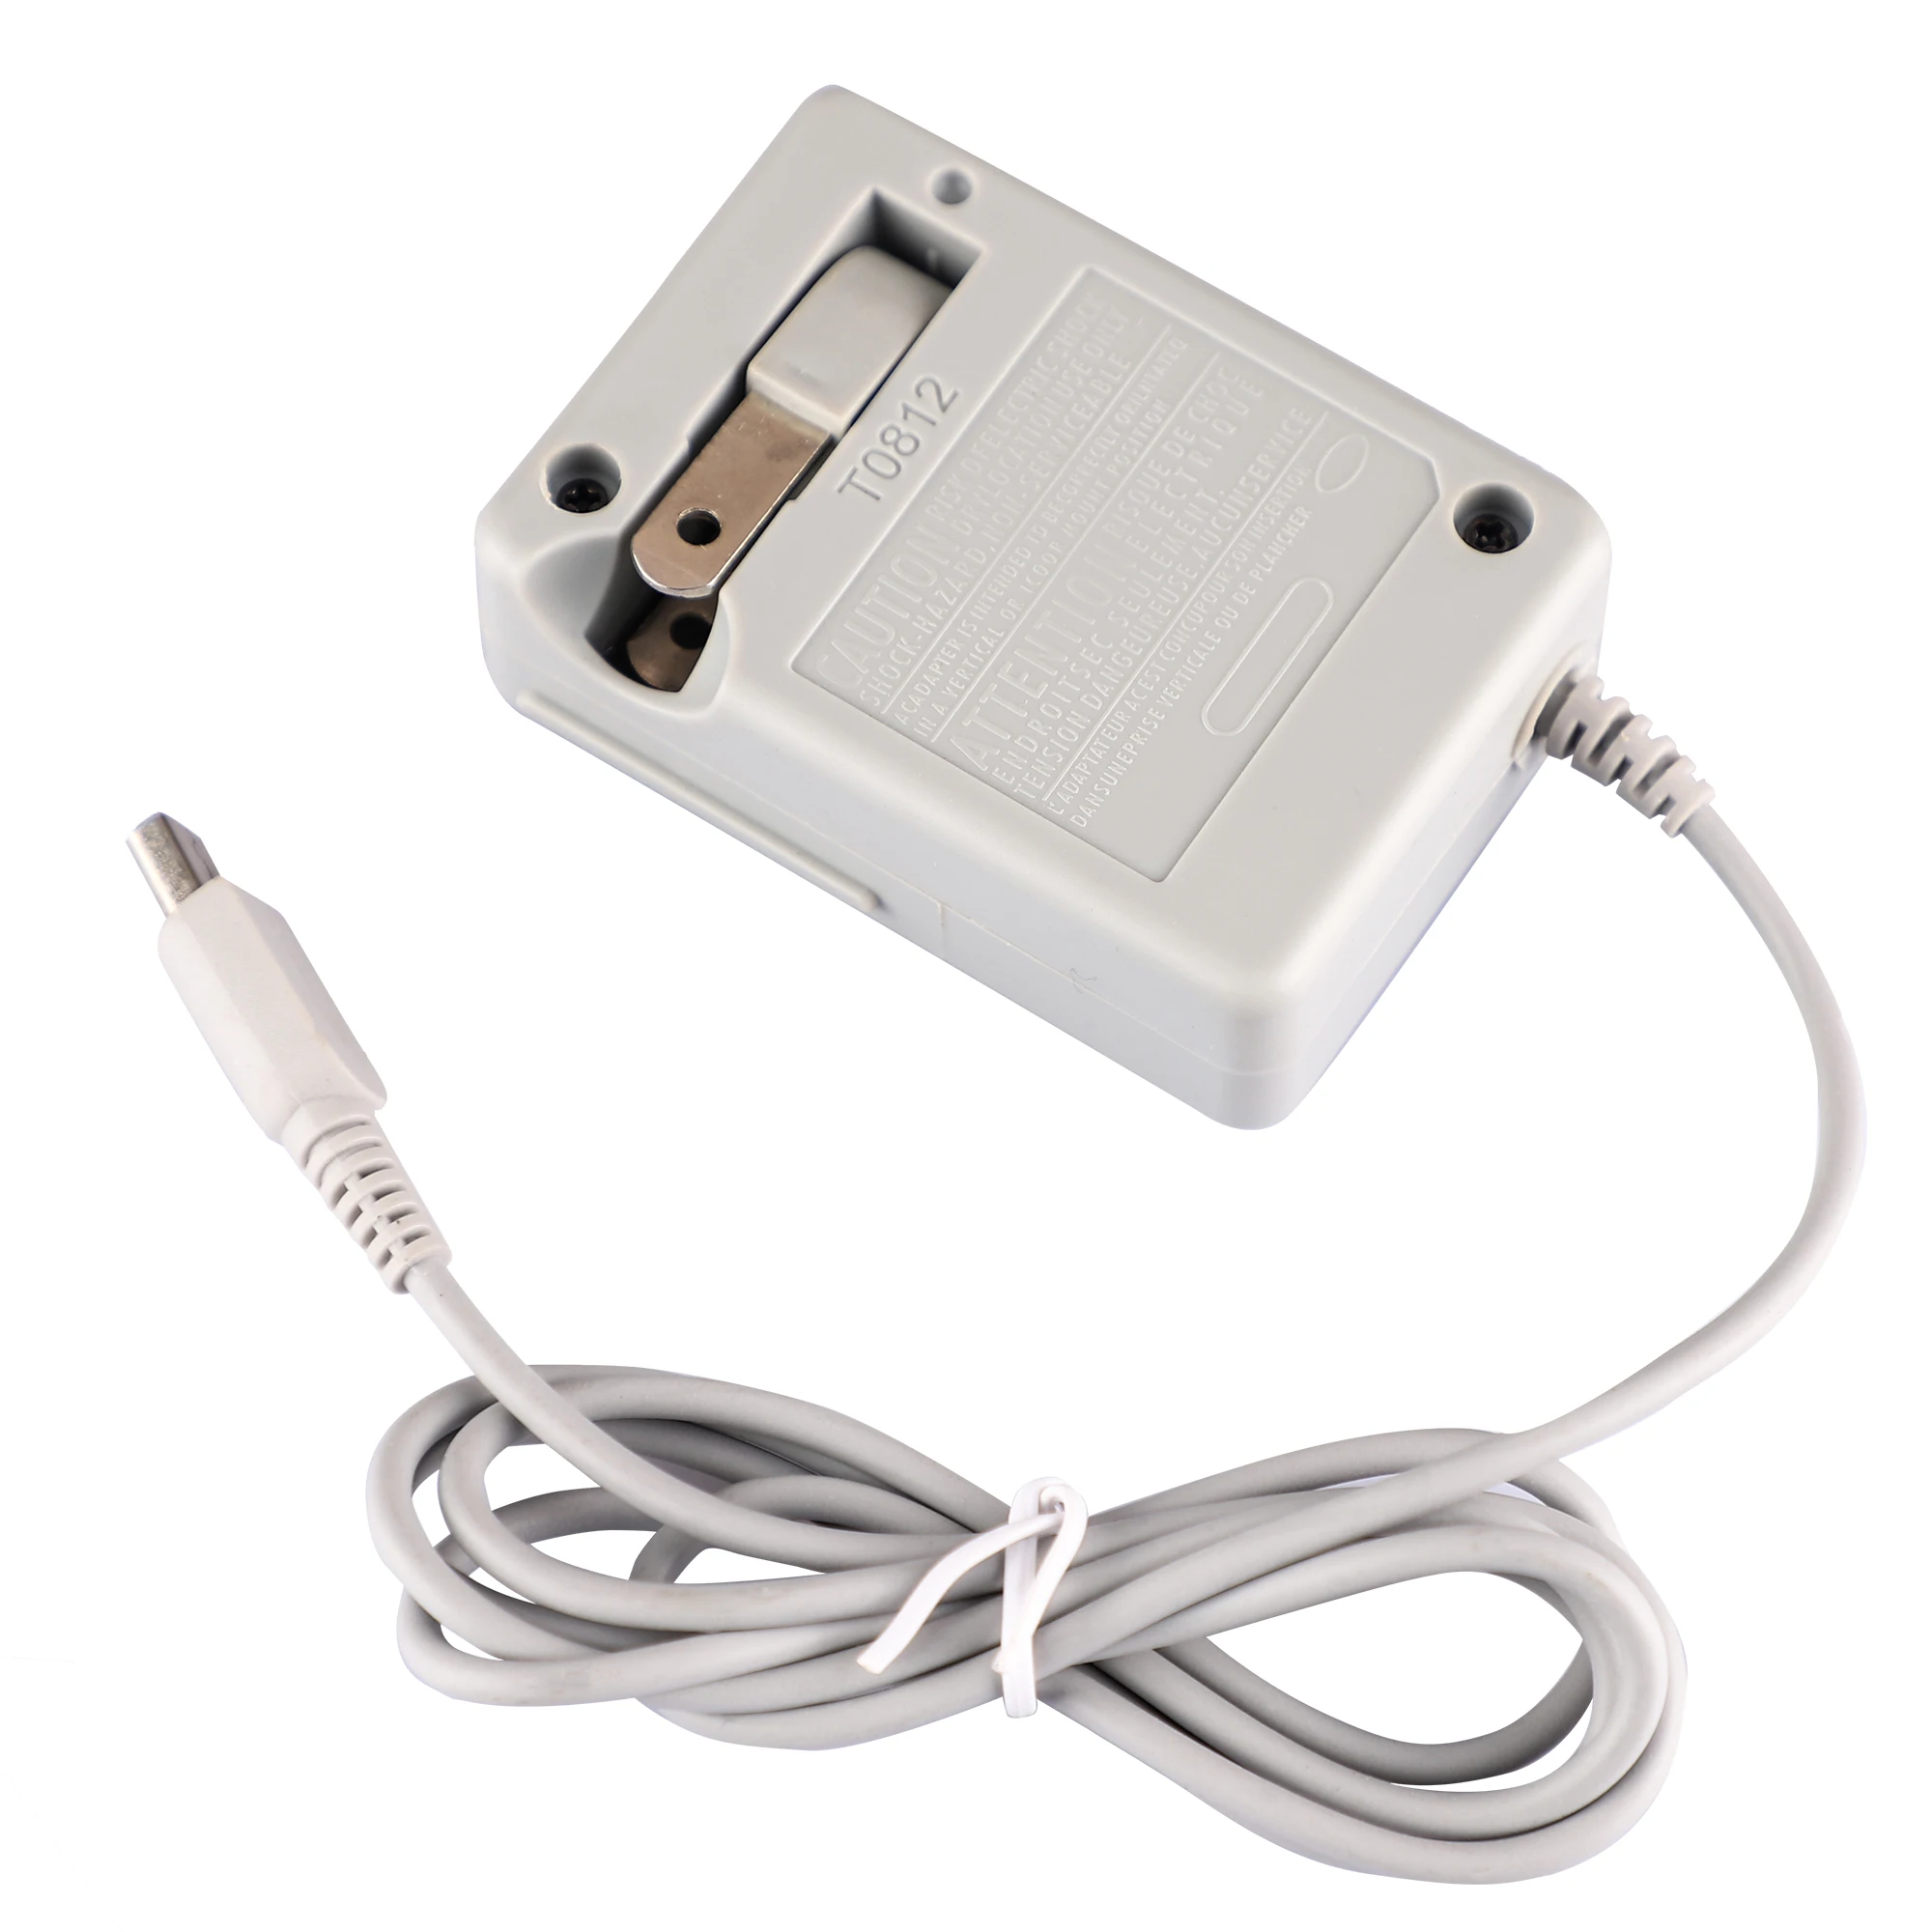 The Most cheapest DSI charger ever made on AliExpress : r/nds